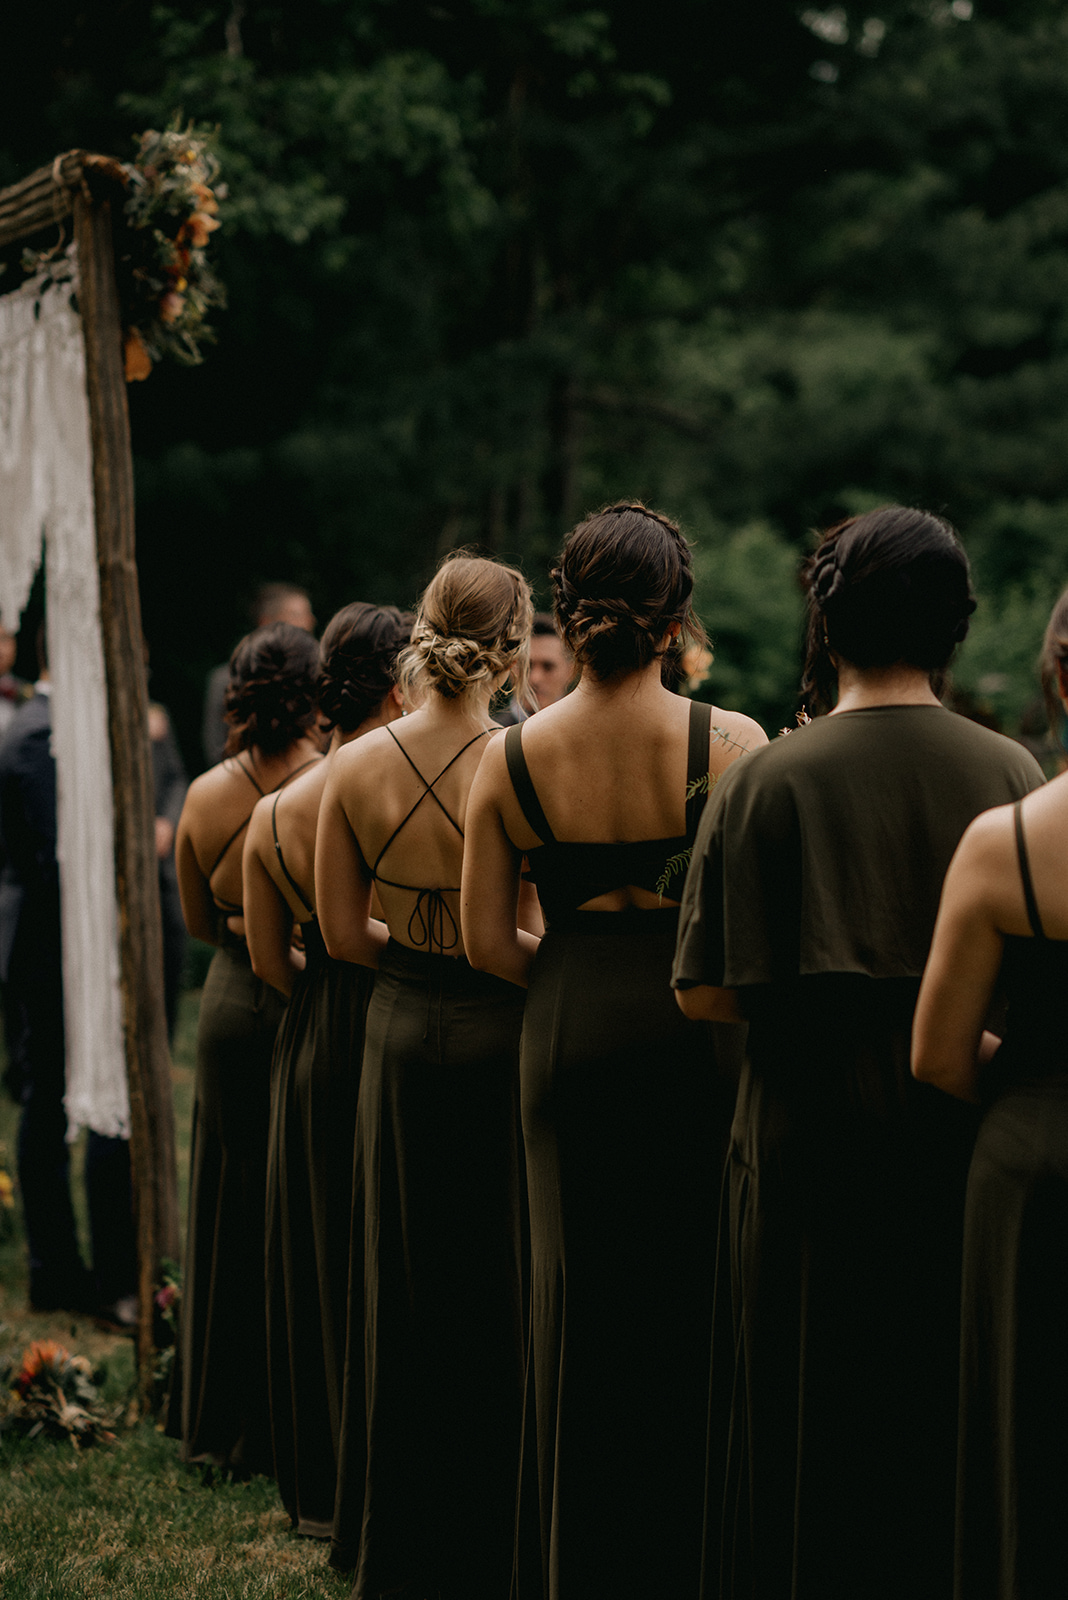 Forest greens dresses of bridesmaids from the back - Pearl Weddings & Events